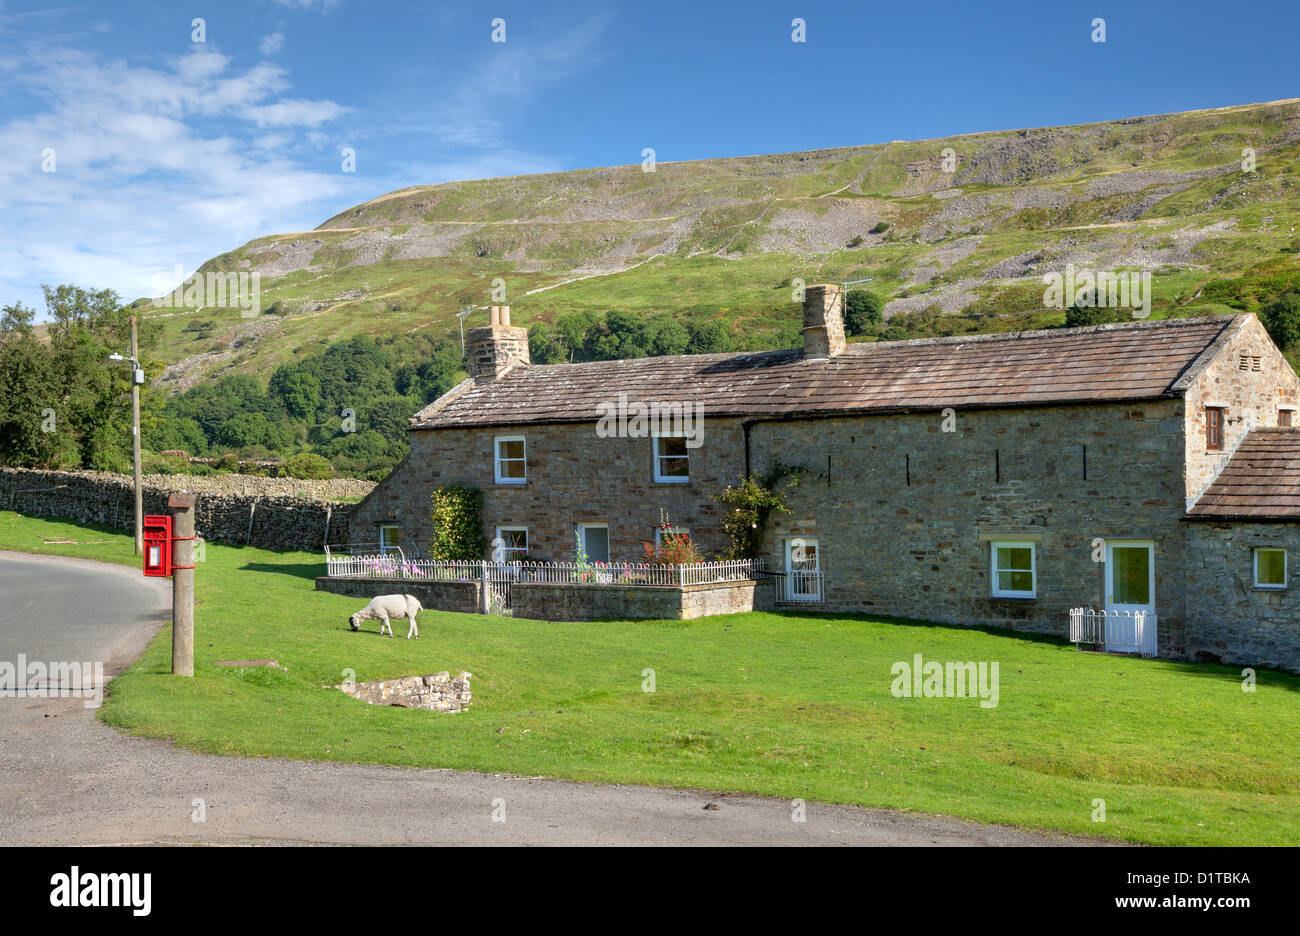 Stone cottage with post box and sheep, Reeth, Yorkshire Dales, England Stock Photo